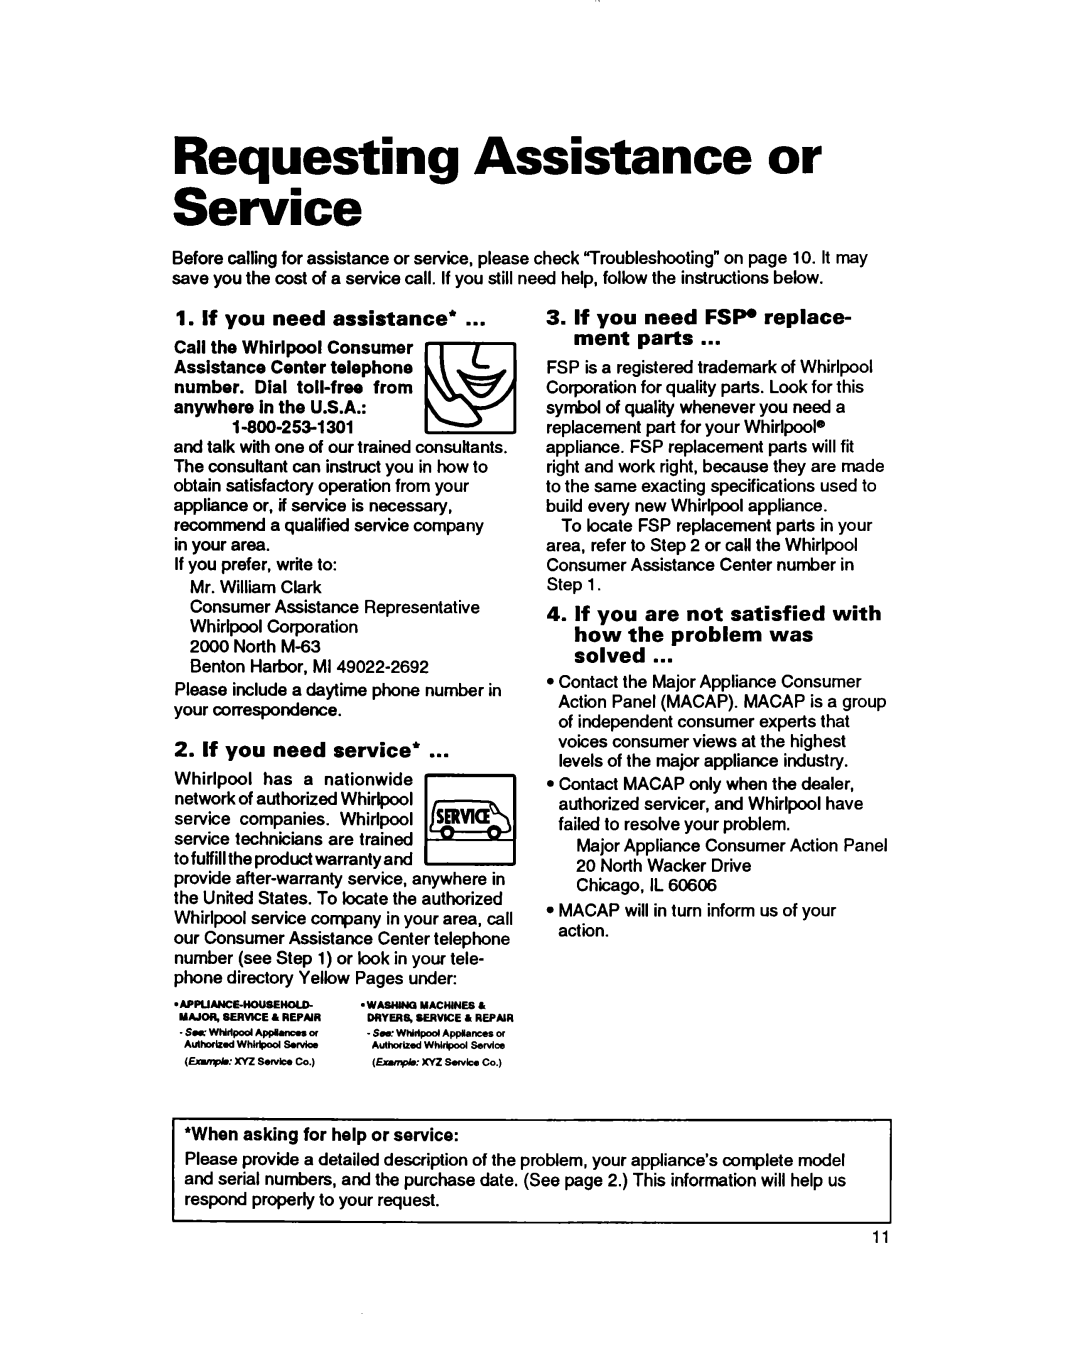 Whirlpool ACU124XD0 Requesting Assistance or Service, If you need assistance, If you need service, l-800-253-1301El 